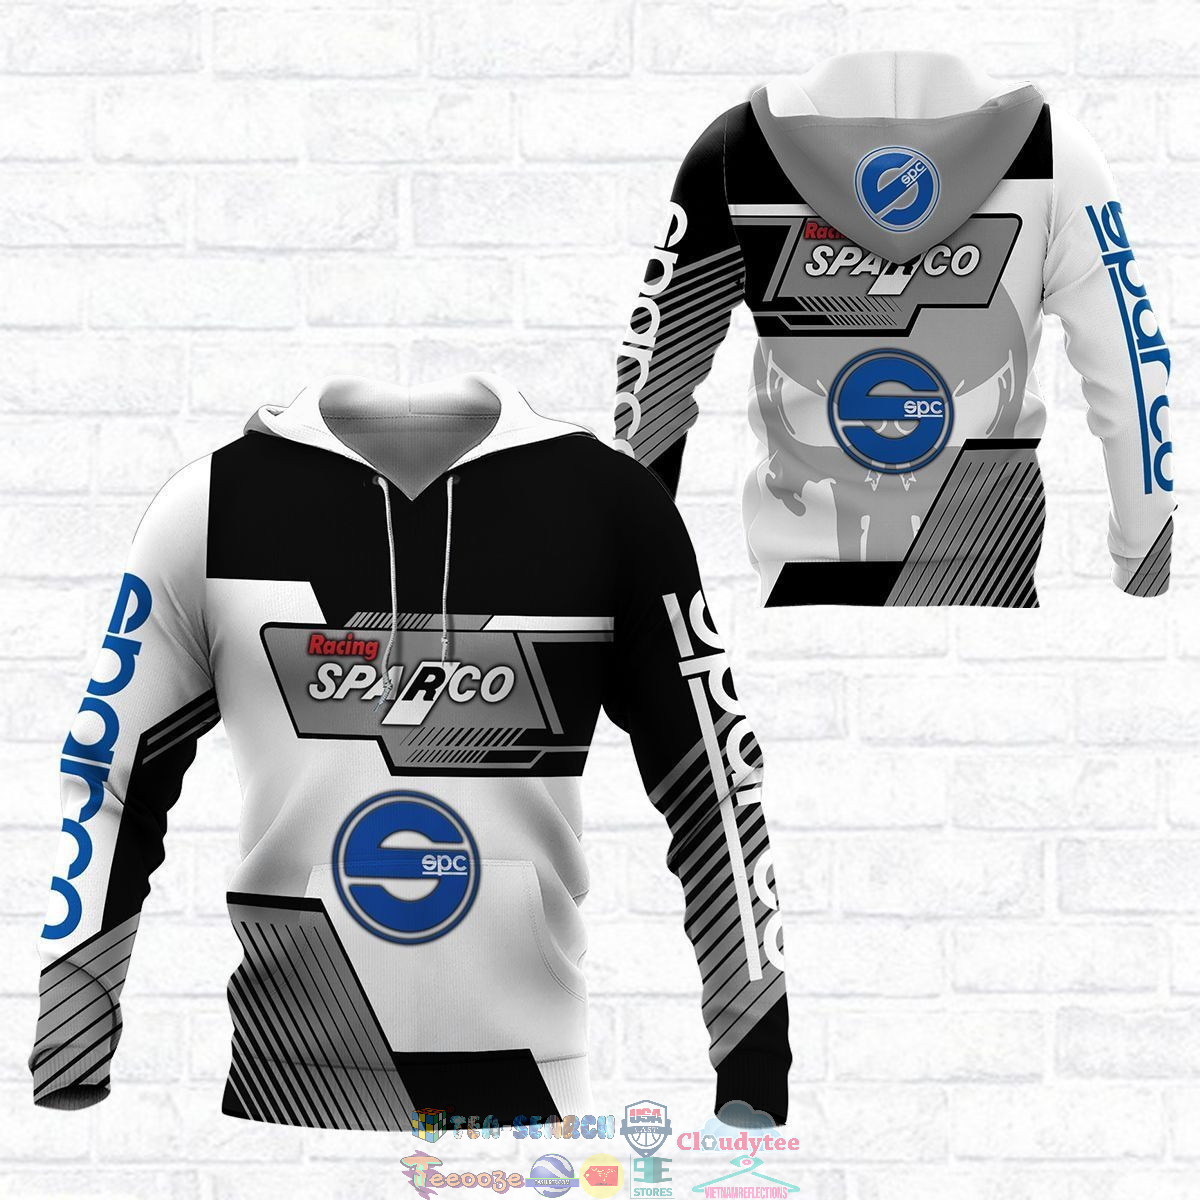 Sparco ver 26 3D hoodie and t-shirt